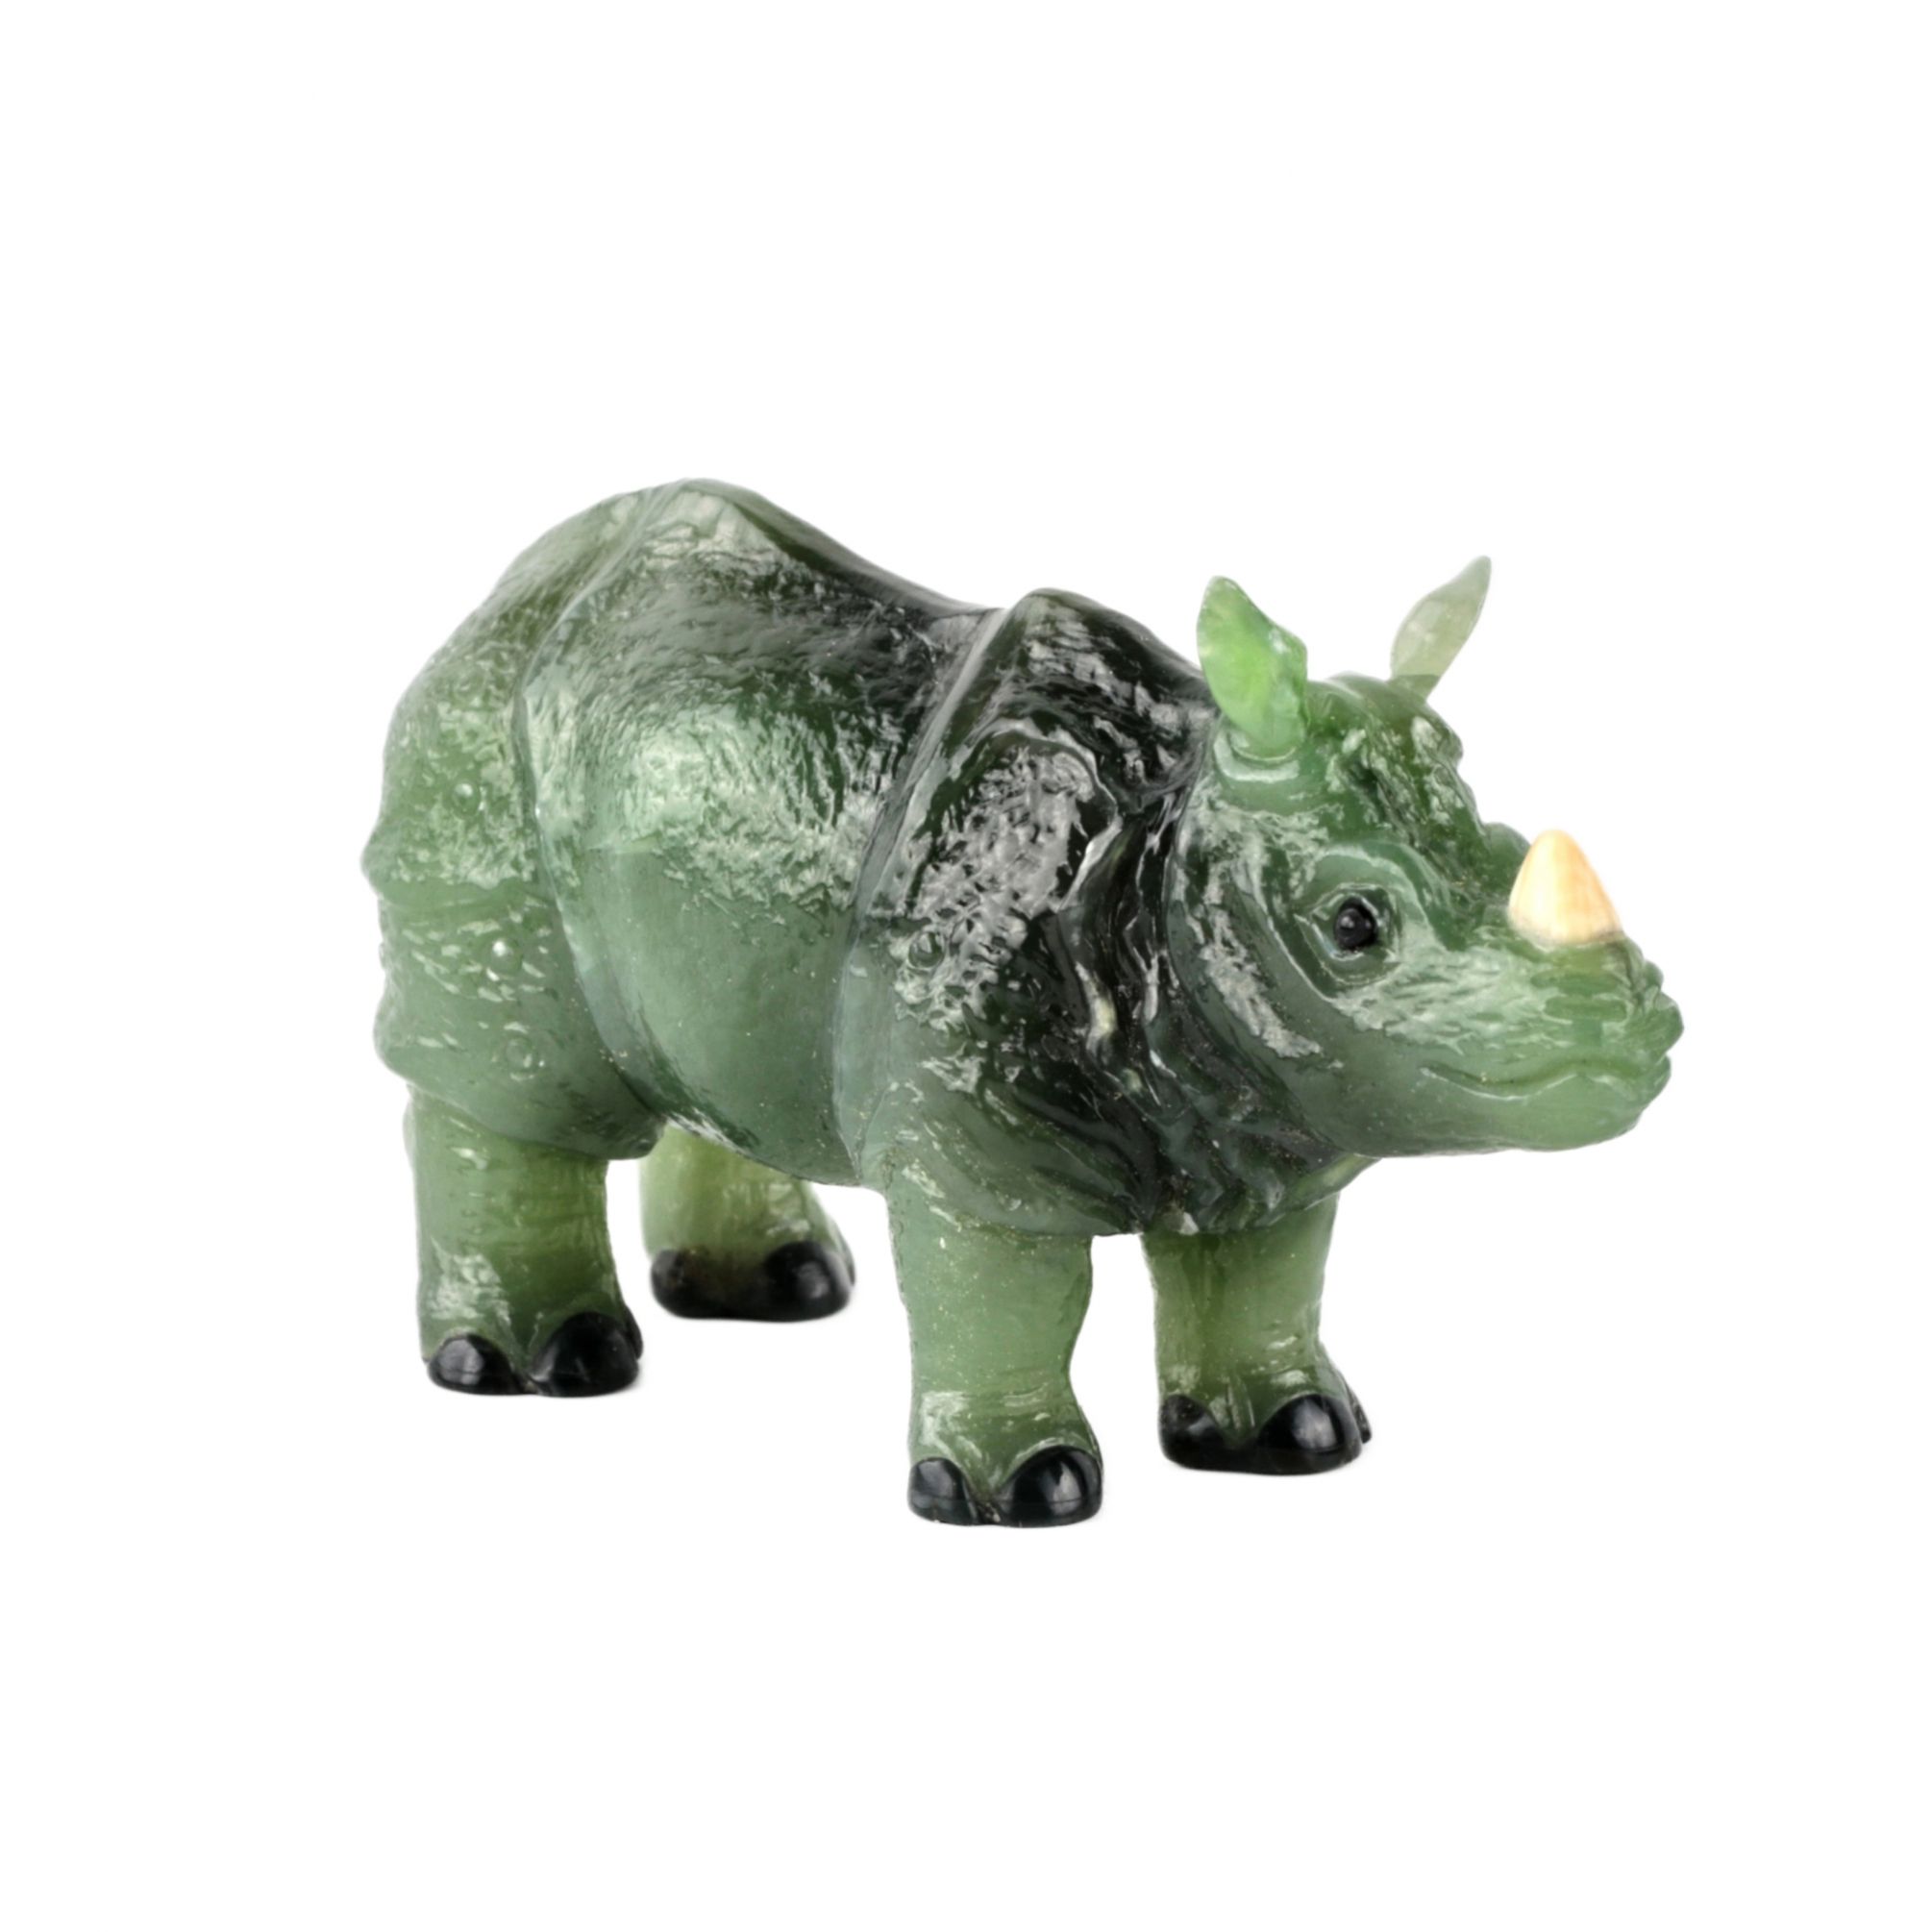 Stone-cutting-miniature-Jade-rhinoceros-in-the-style-of-products-from-the-firm-of-Faberge-